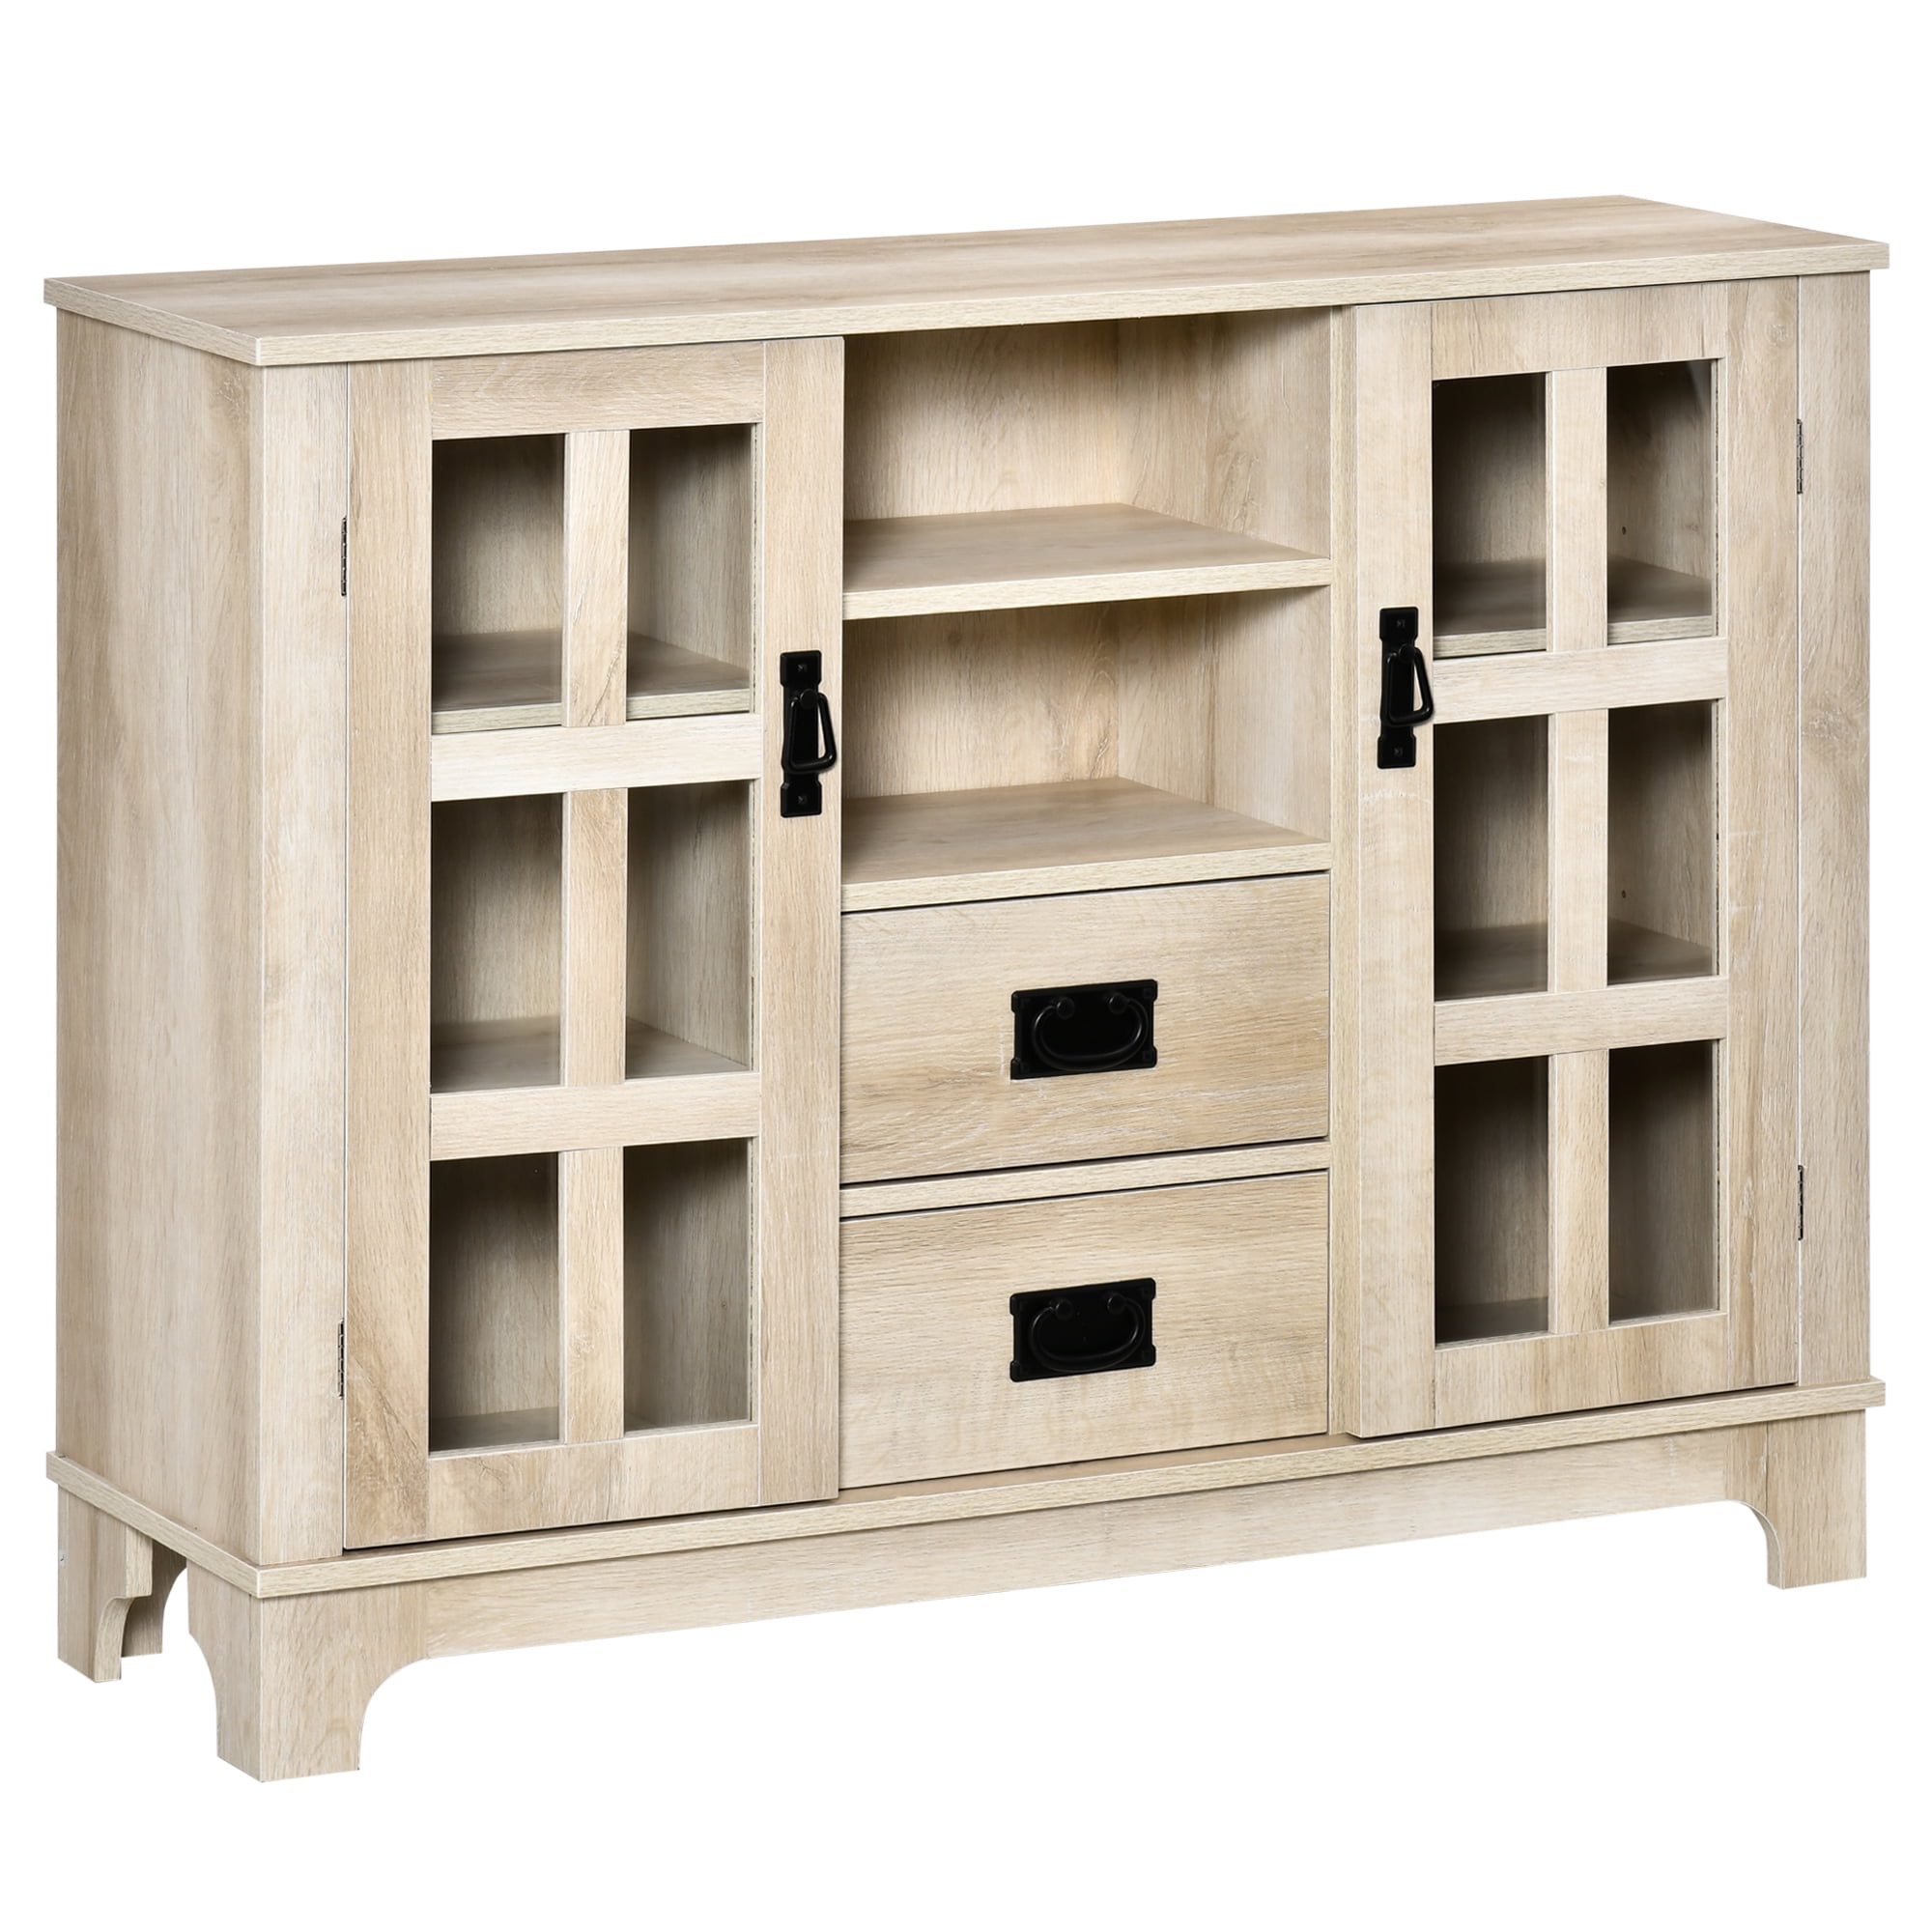 HOMCOM Storage Cabinet Sideboard Wooden Cupboard with Drawers Shelves White 